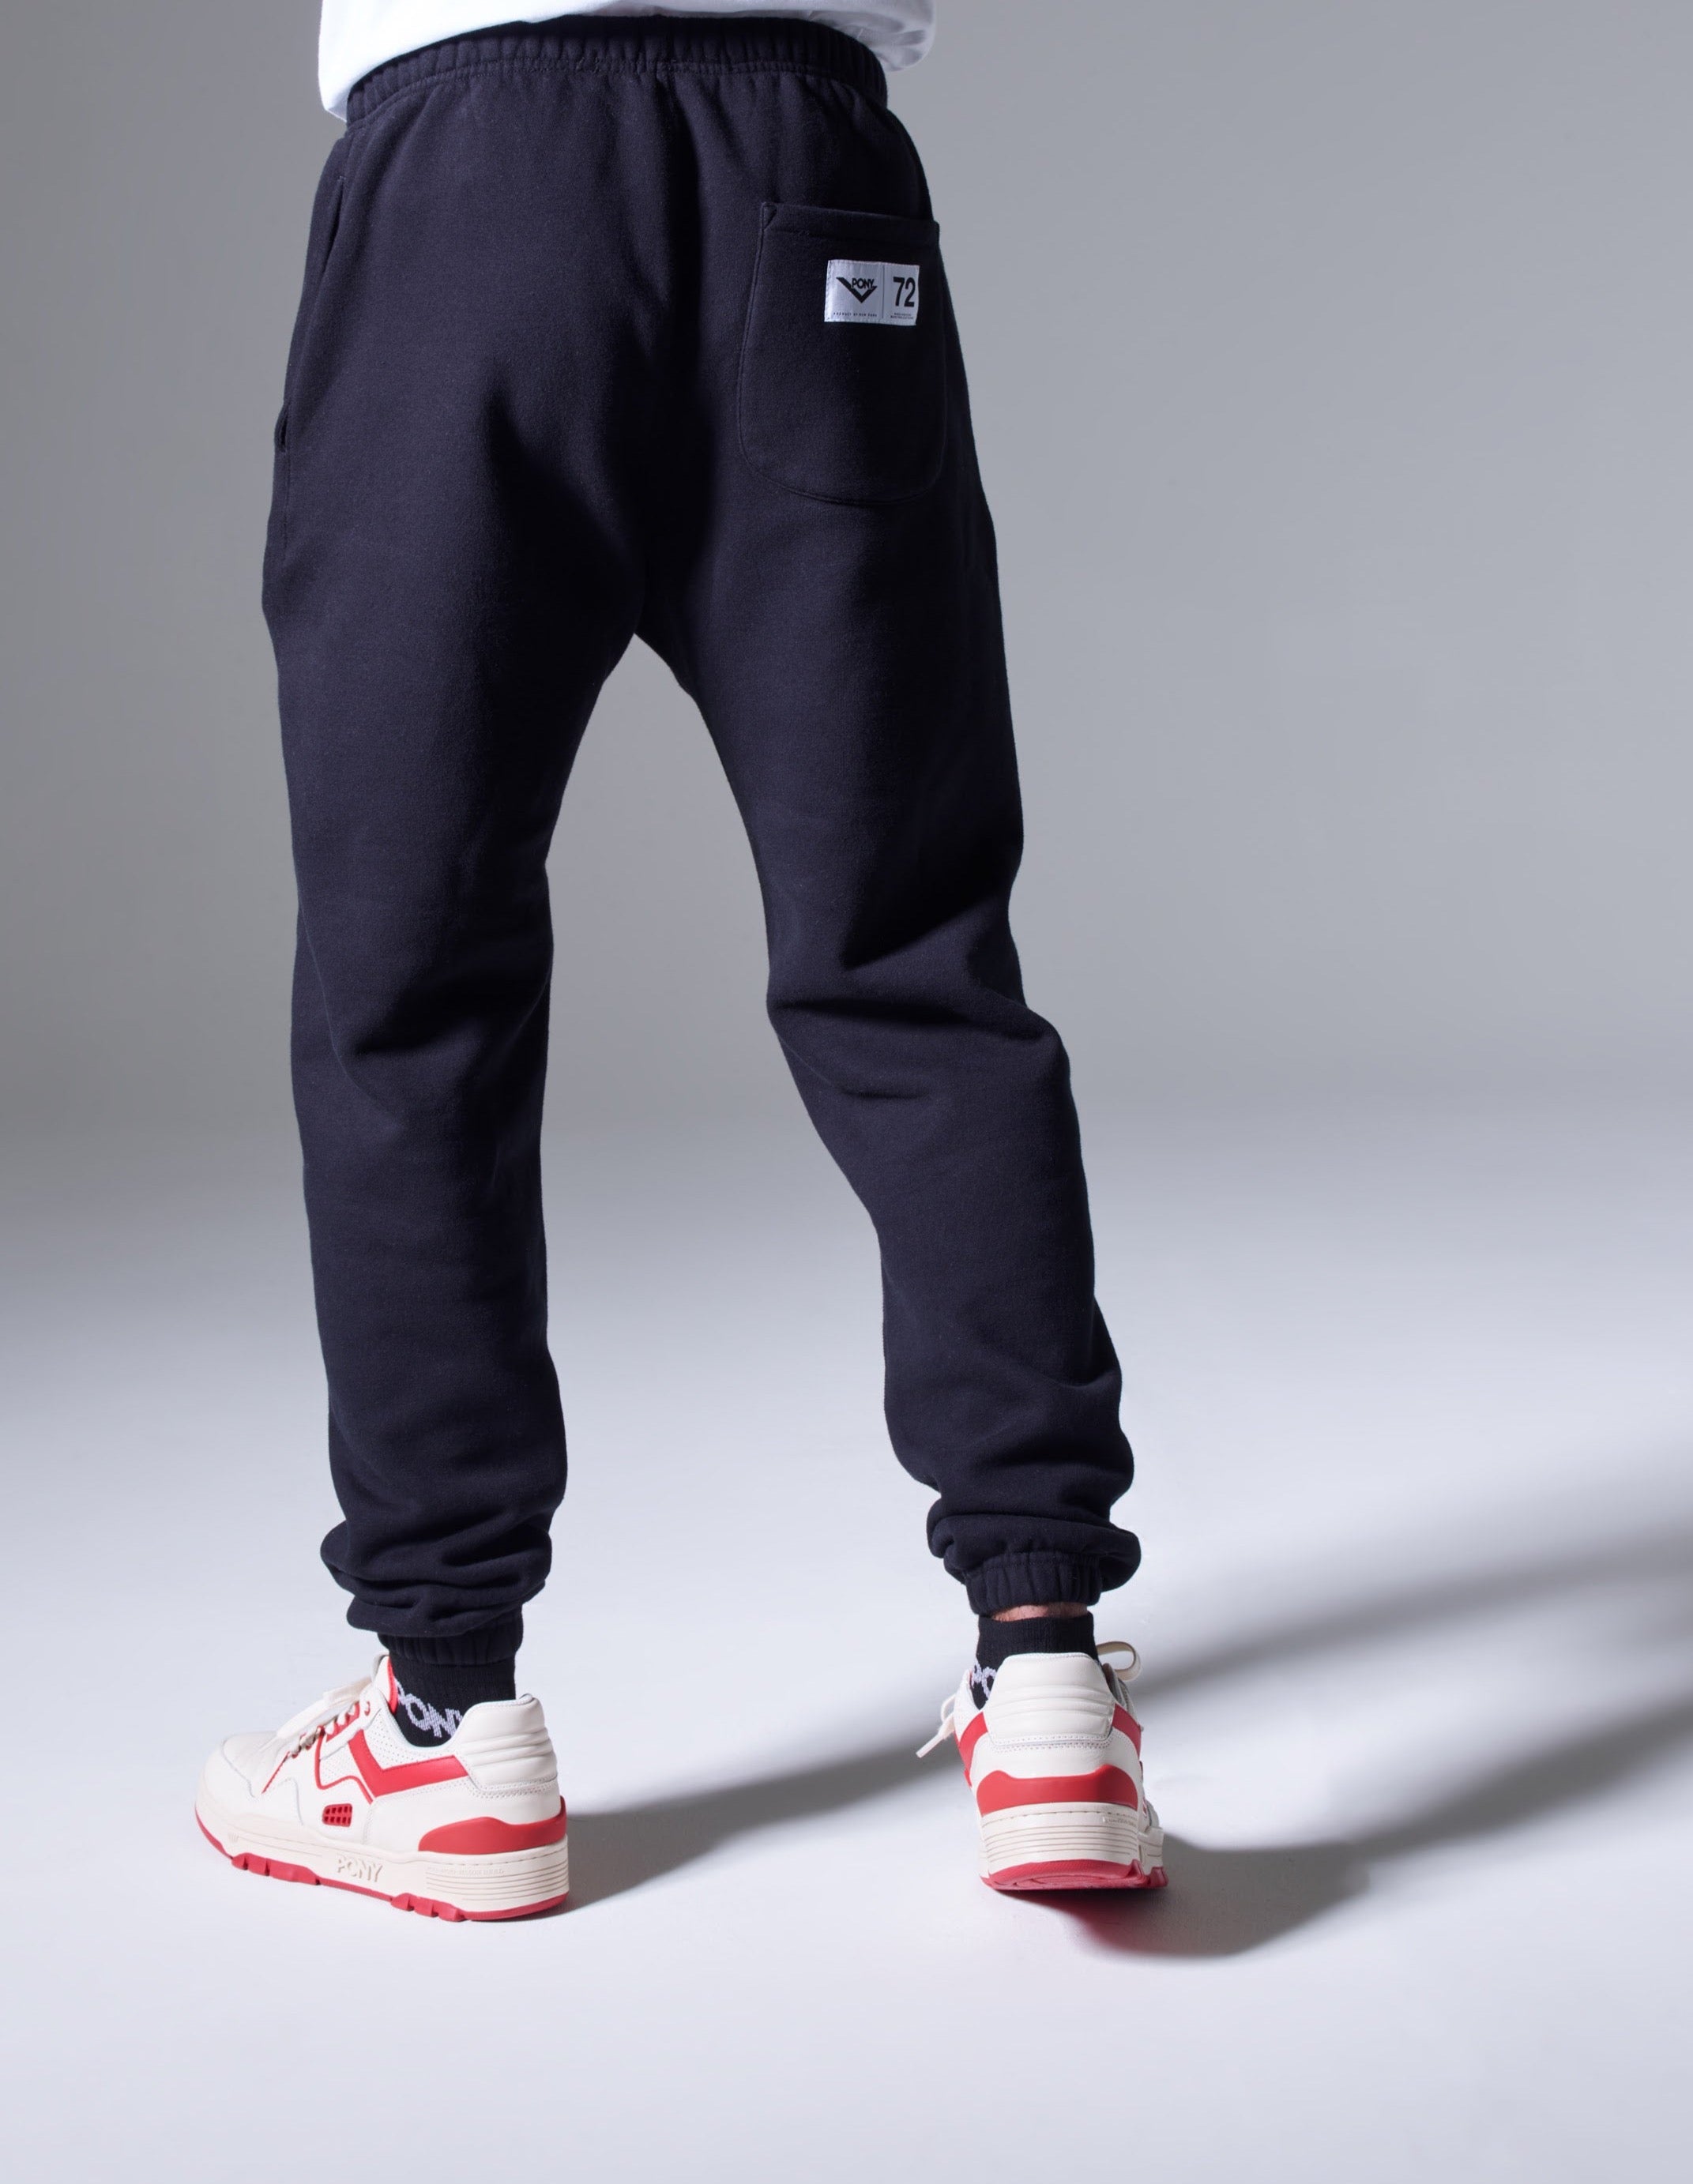 Airpant 23 - 4 Way Stretch & Secure Mobile Pocket - Regular Fit Jogger